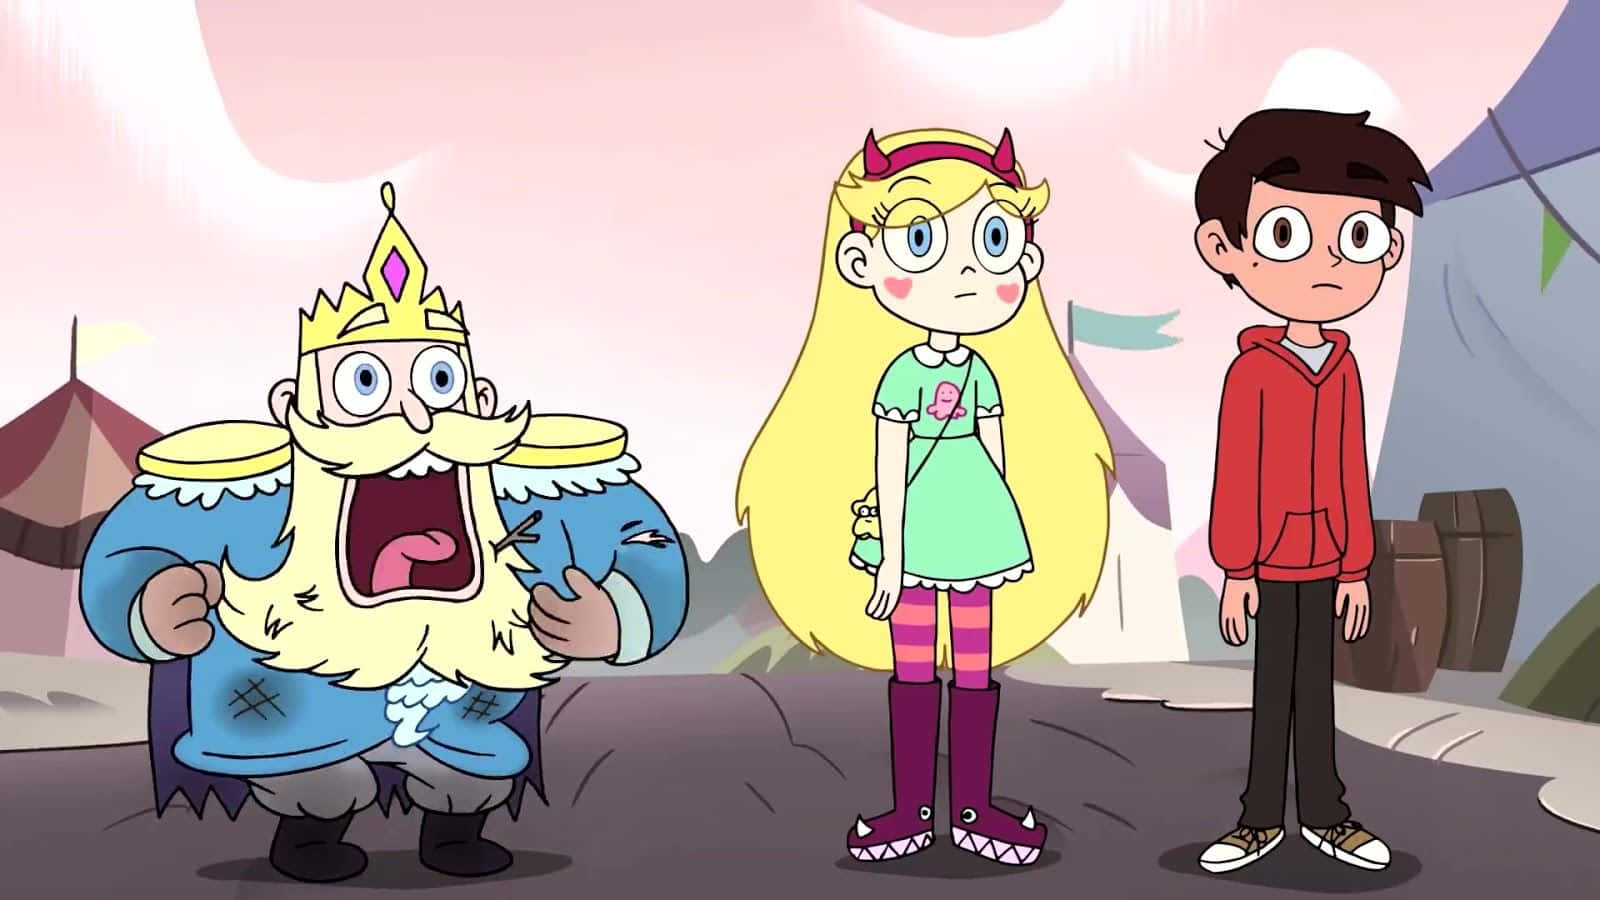 Star Butterfly and Marco Diaz from Star Vs The Forces Of Evil in a vibrant action scene